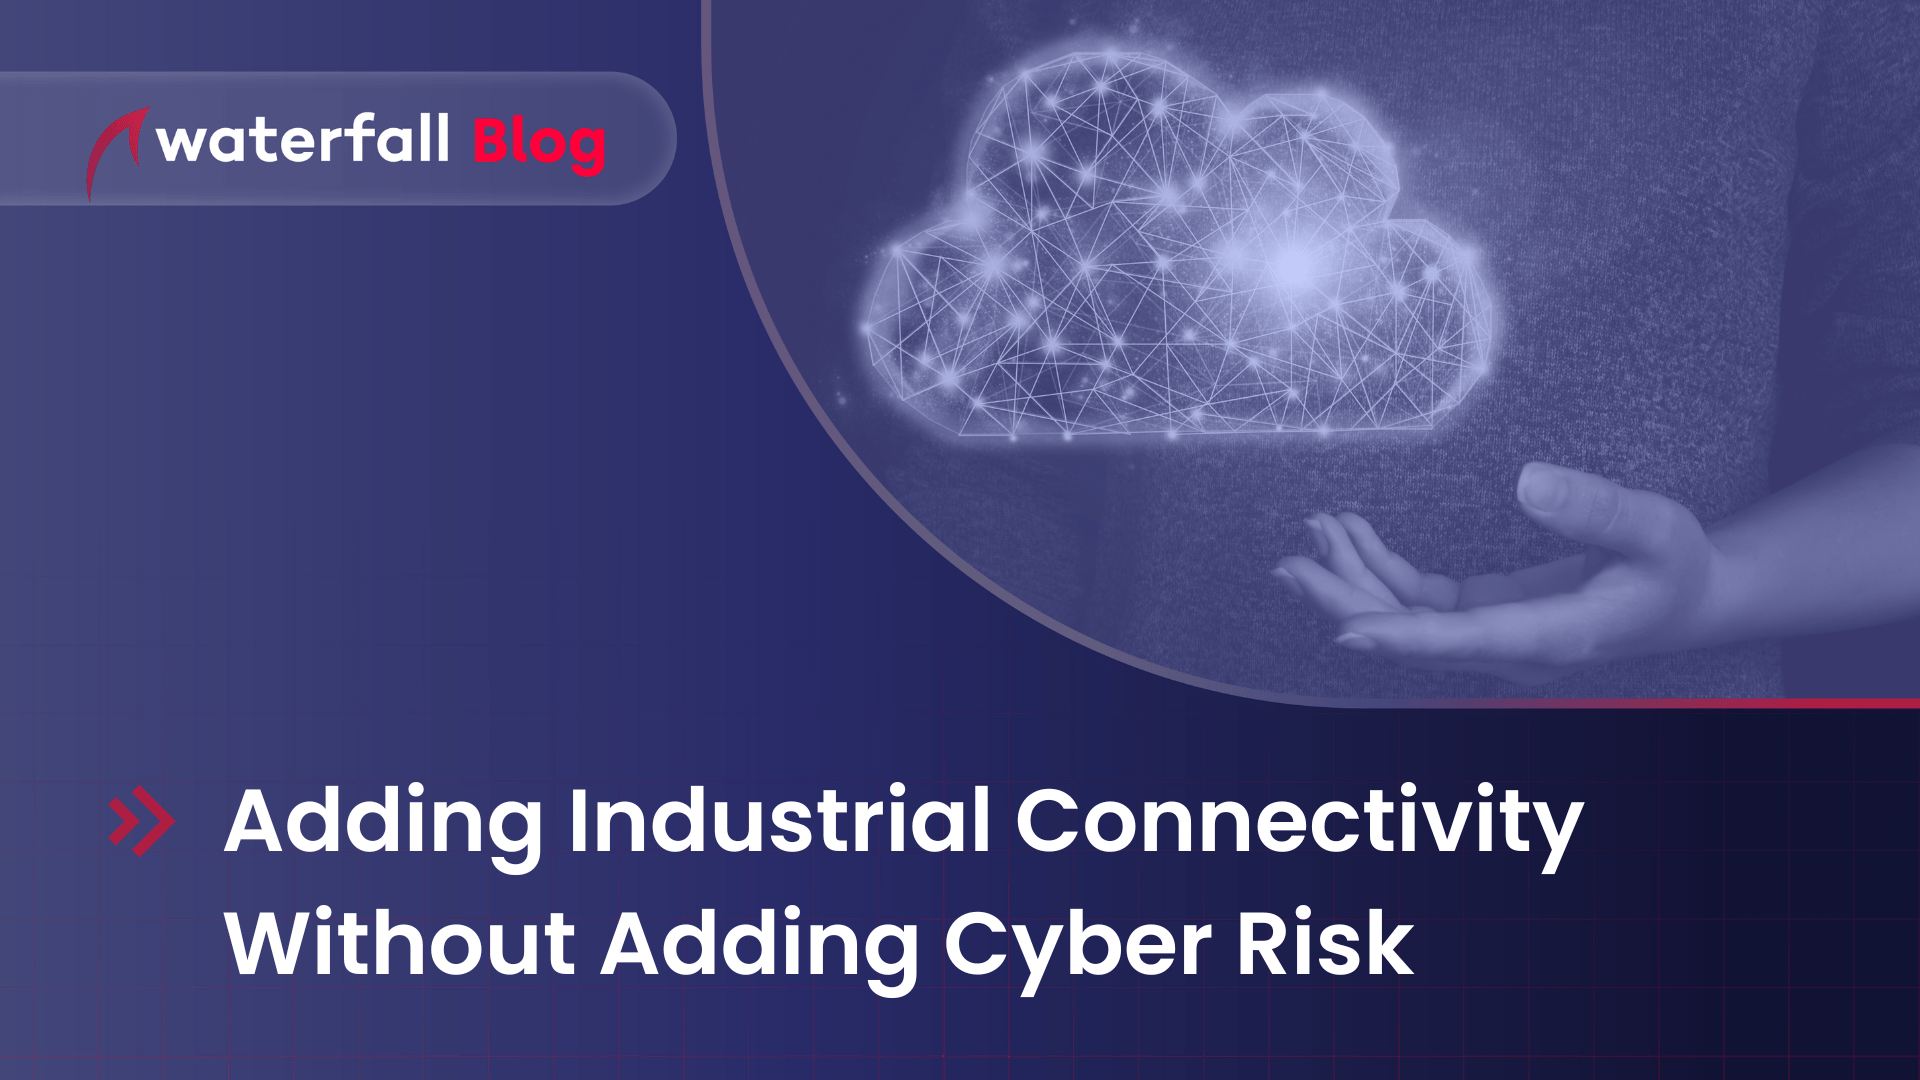 Industrial Connectivity without cyber risk